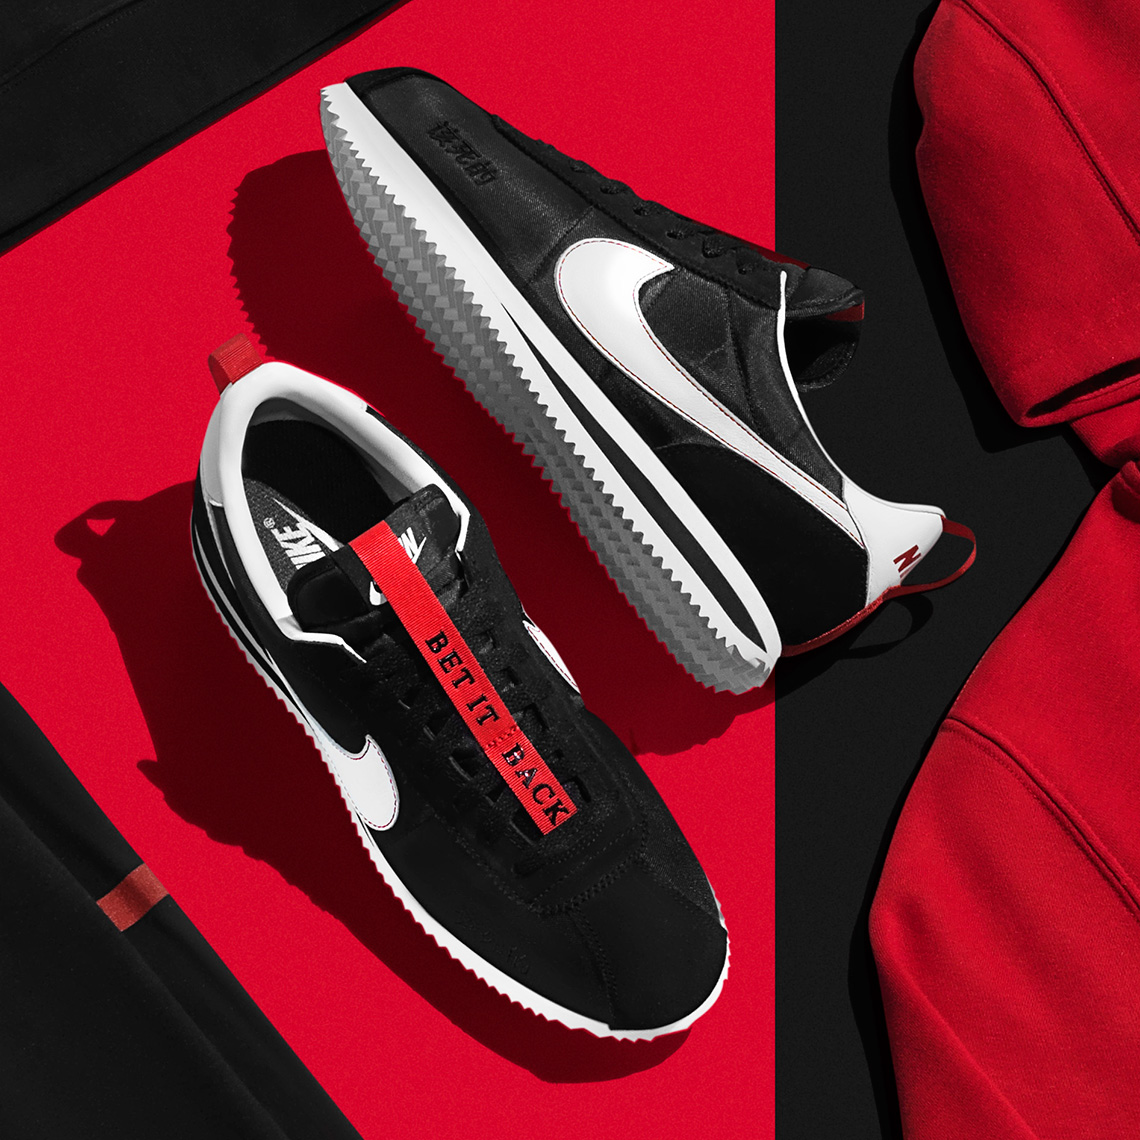 nike-top-dawg-entertainment-cortez-kenny-1-the-championship-tour-release-info-2.jpg